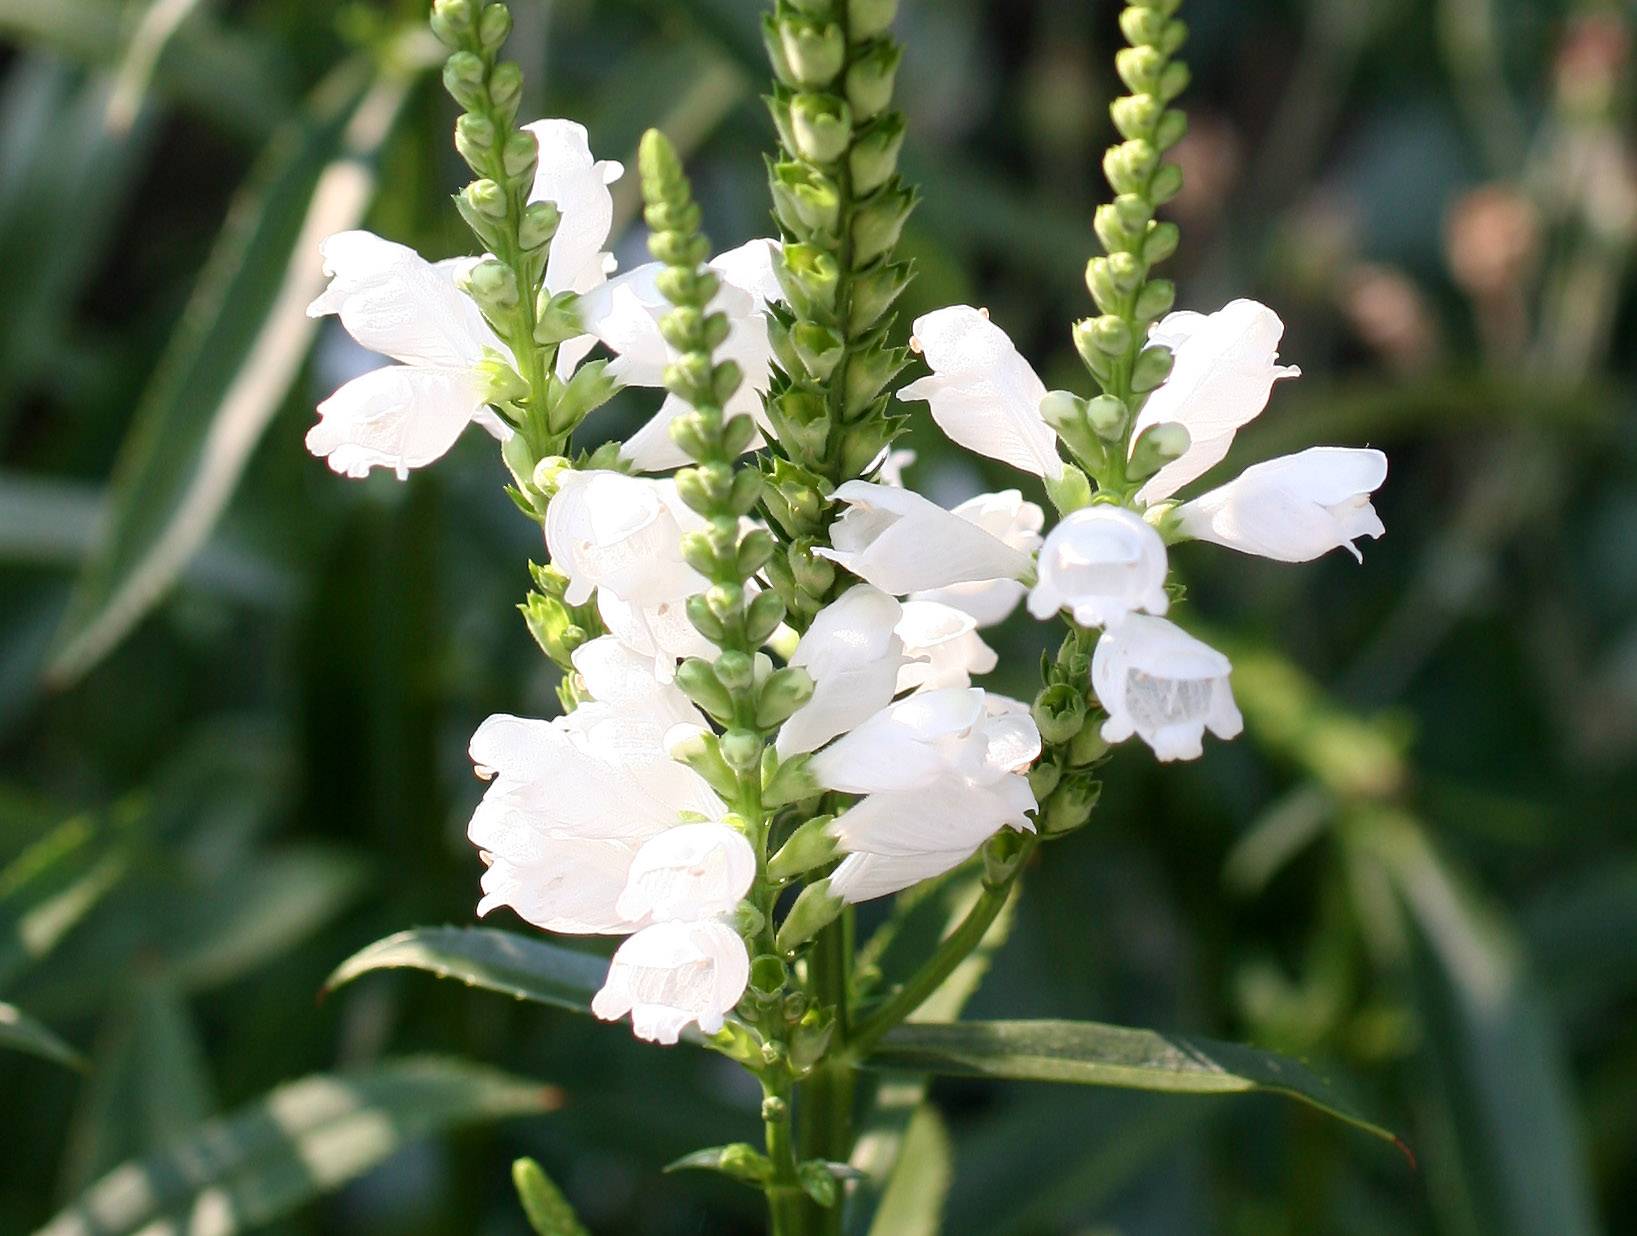 Physostegia or Obedient Plant